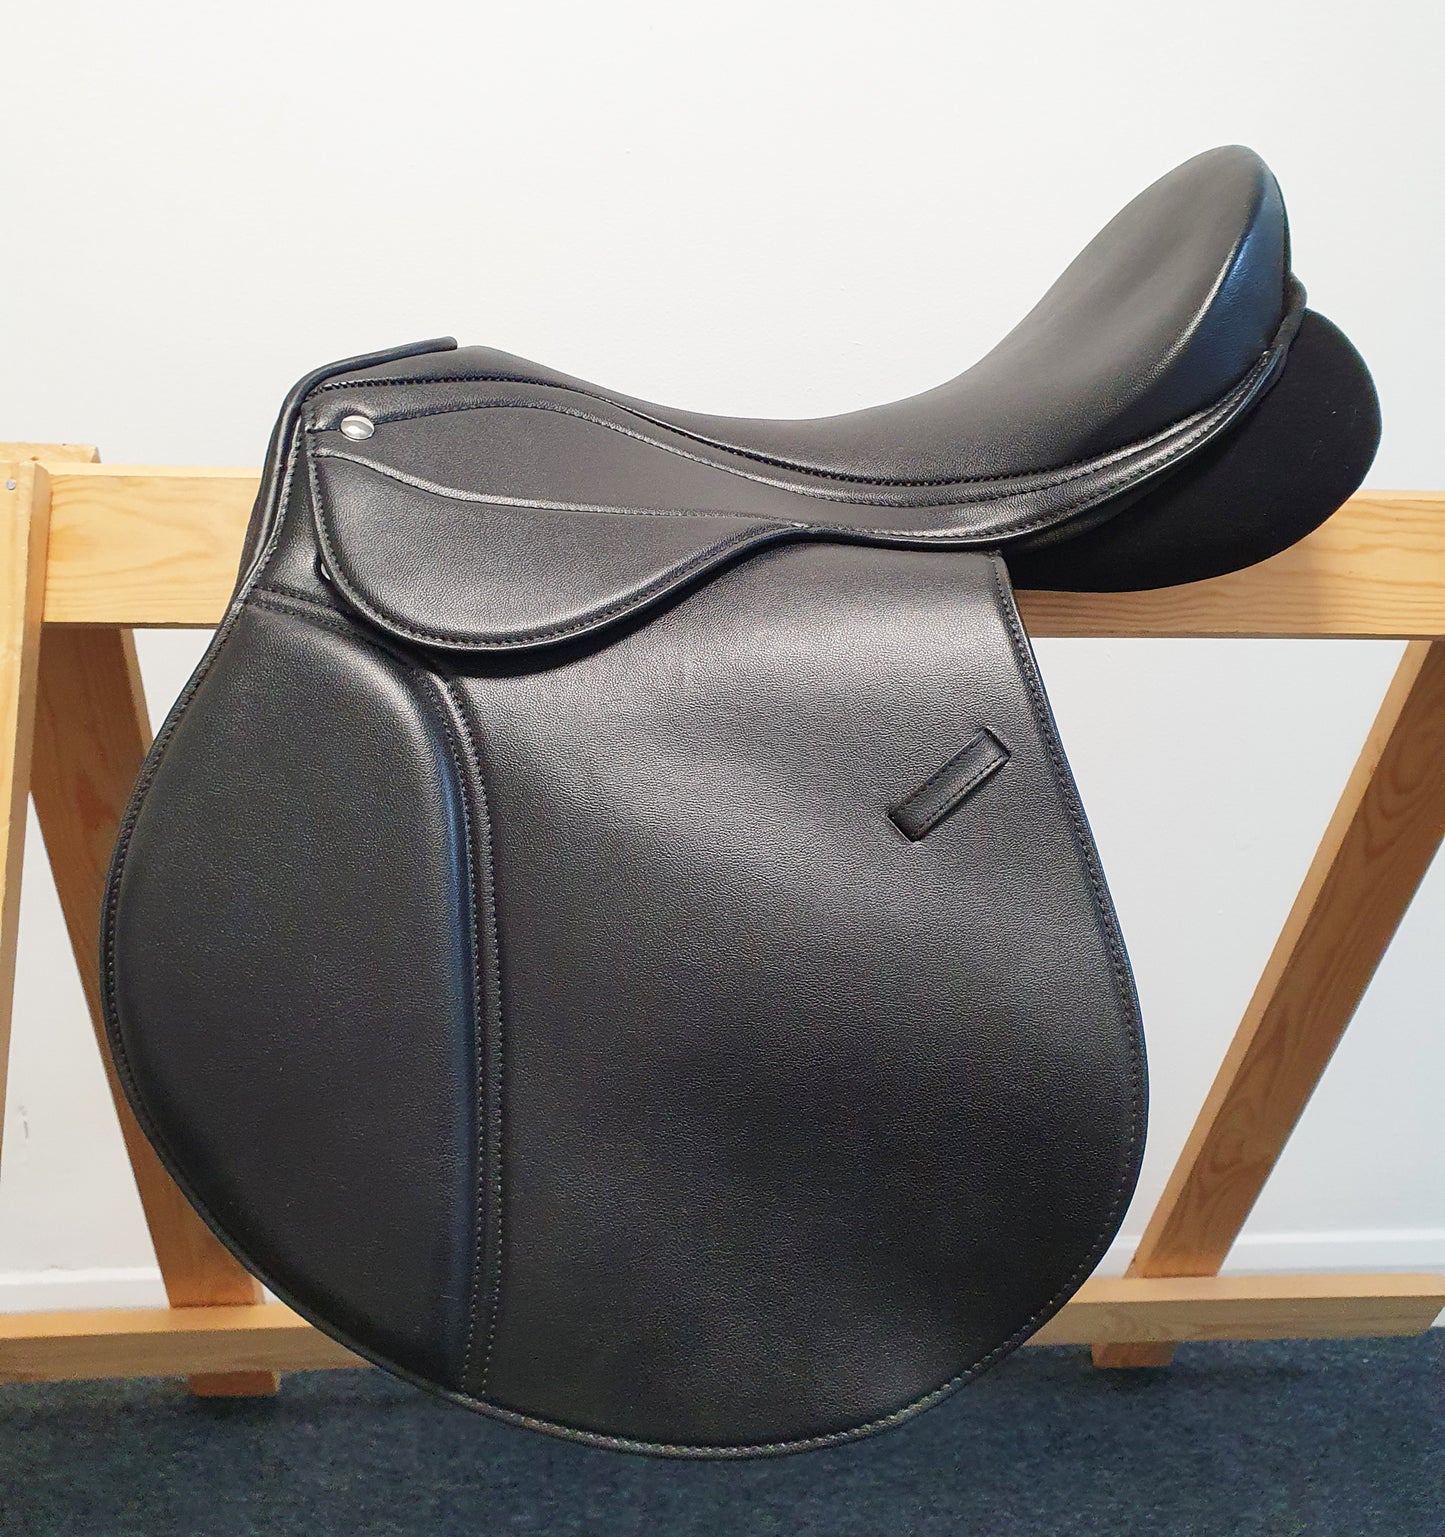 Synthetic Leather self adjusting all purpose Saddle with Changeable Gullet Black size 16 and 17